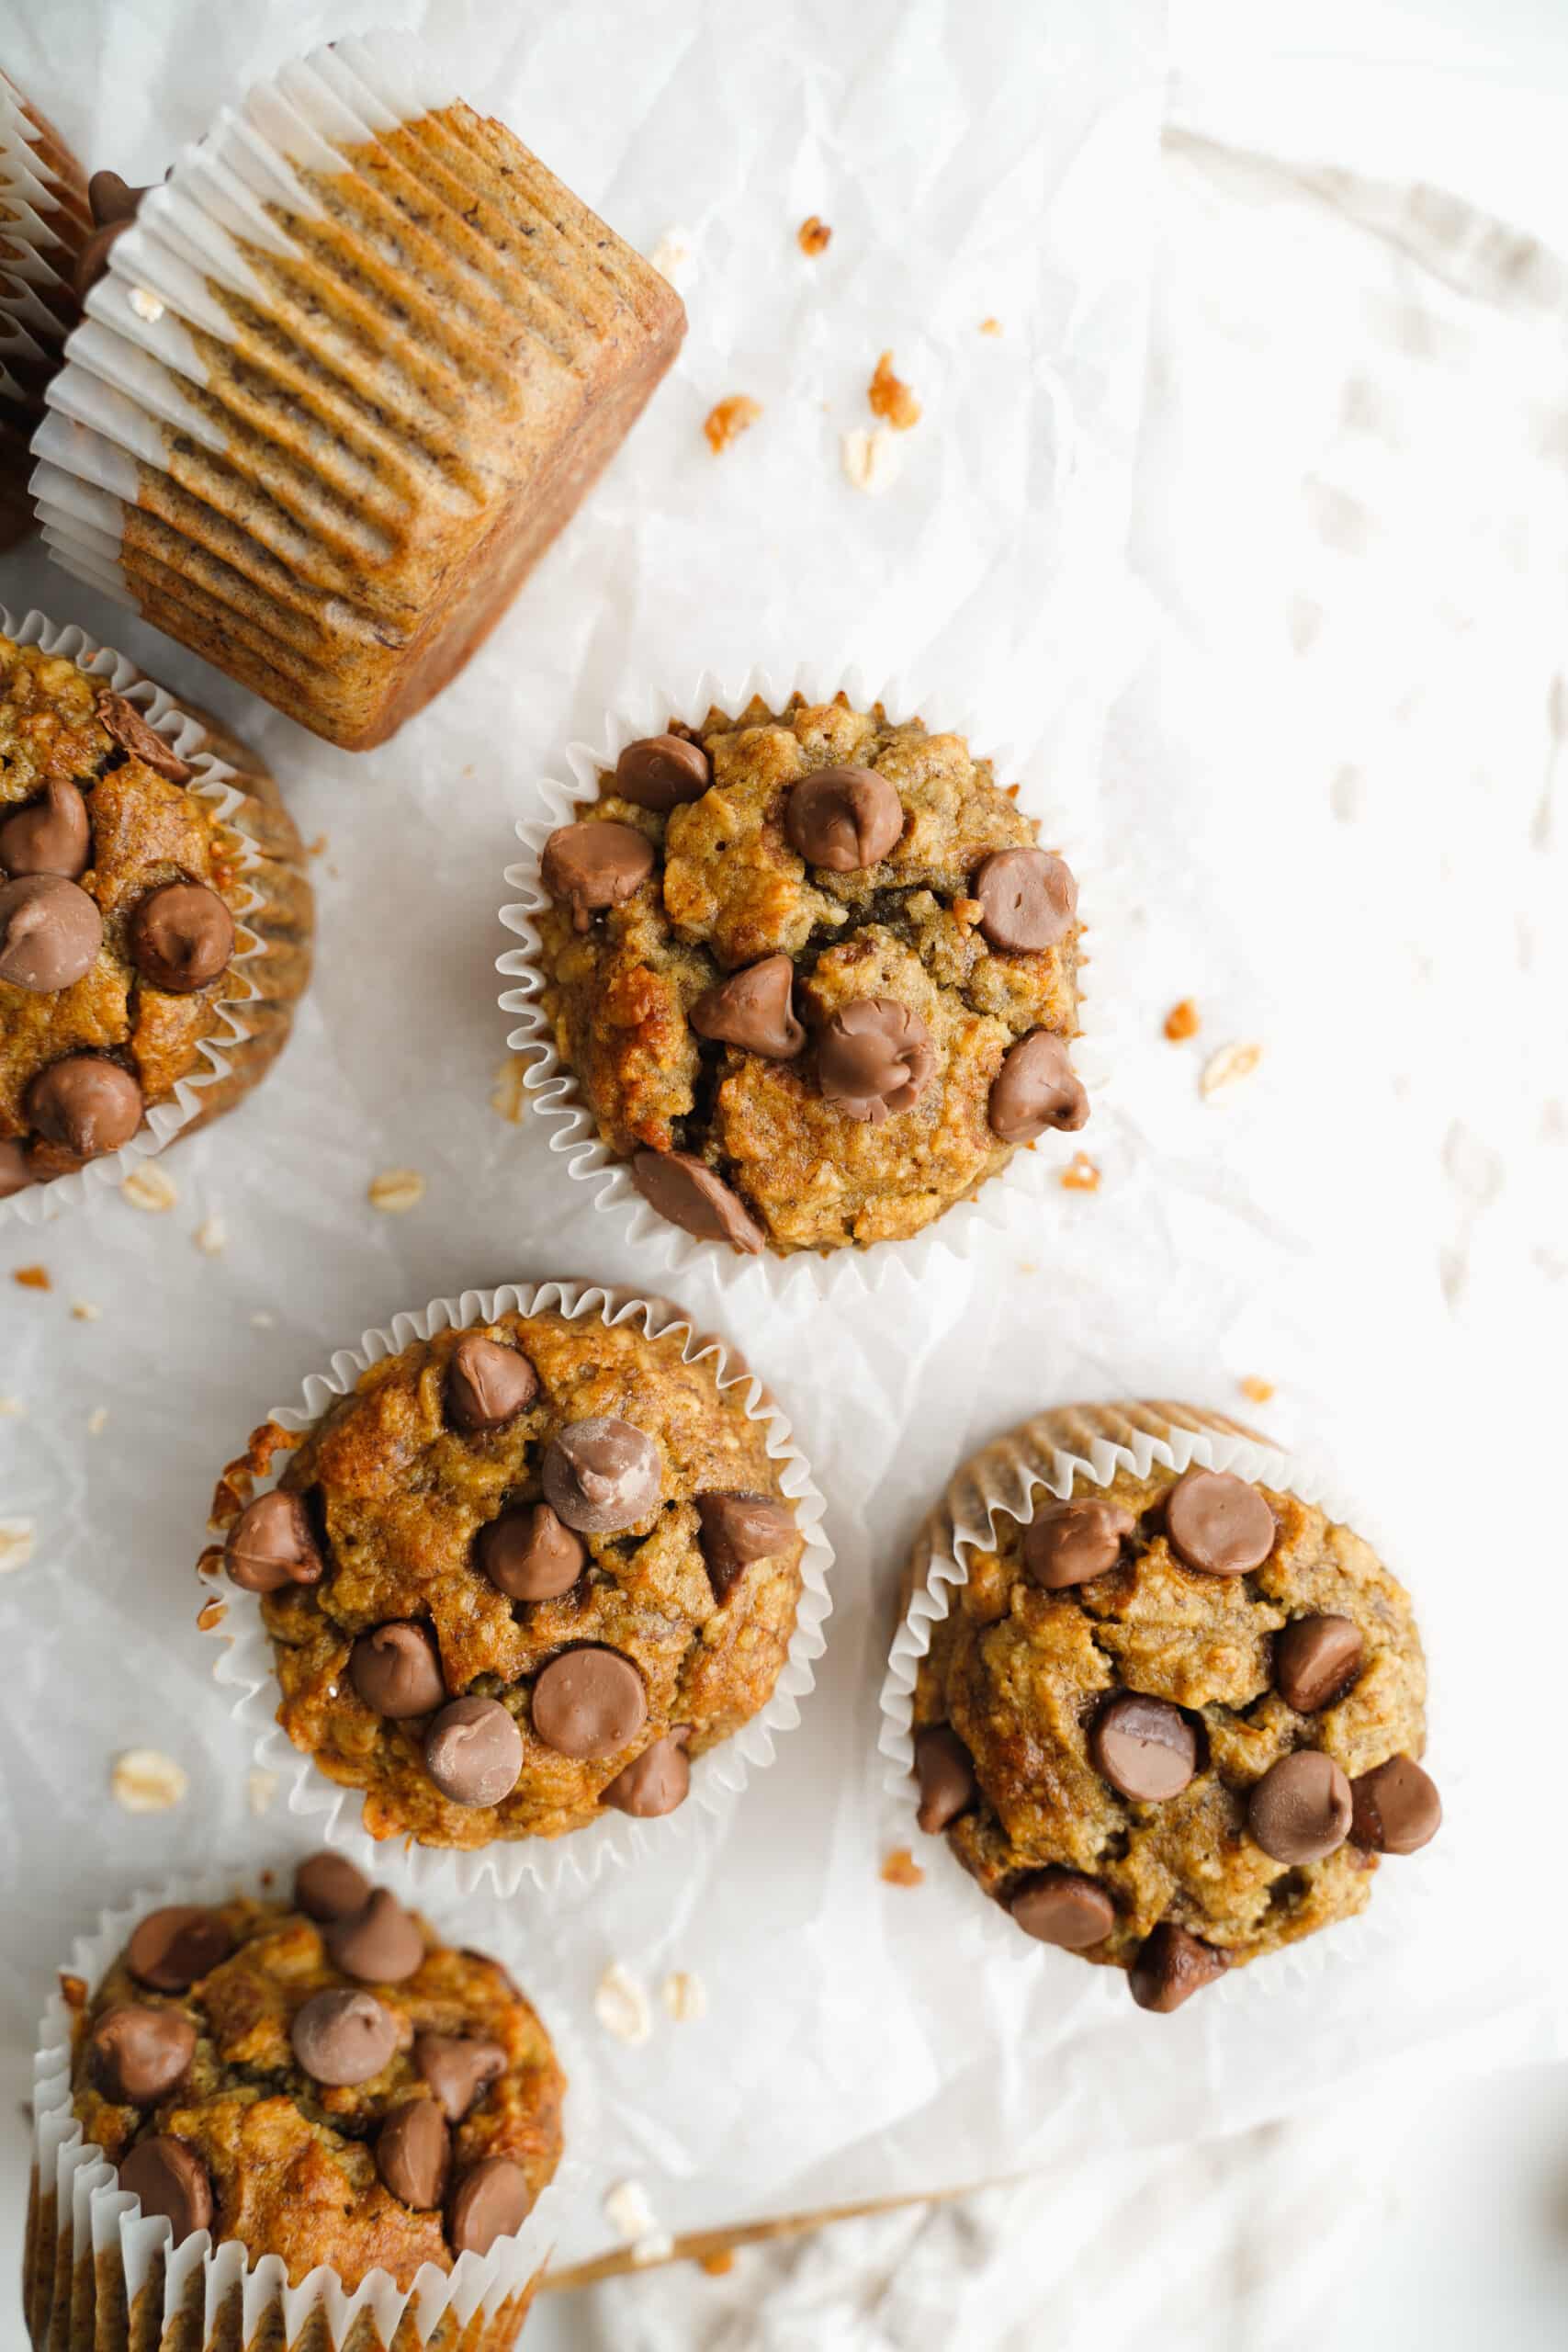 Chocolate chip muffins | cookingwithcassandra.com